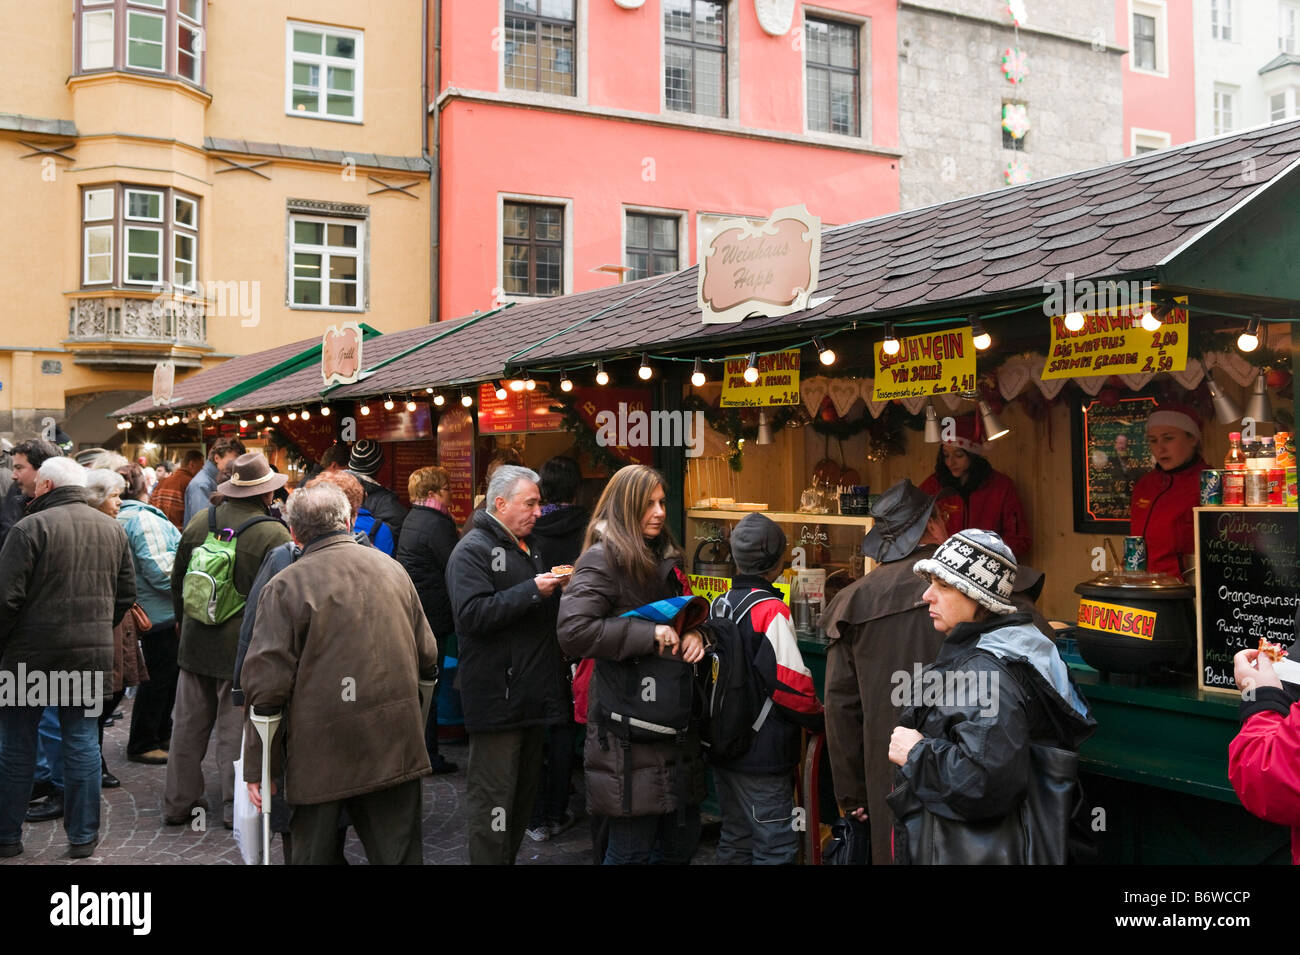 Gluhwein stall at the Christmas Market in the old town (Altstadt), Innsbruck, Tyrol, Austria Stock Photo